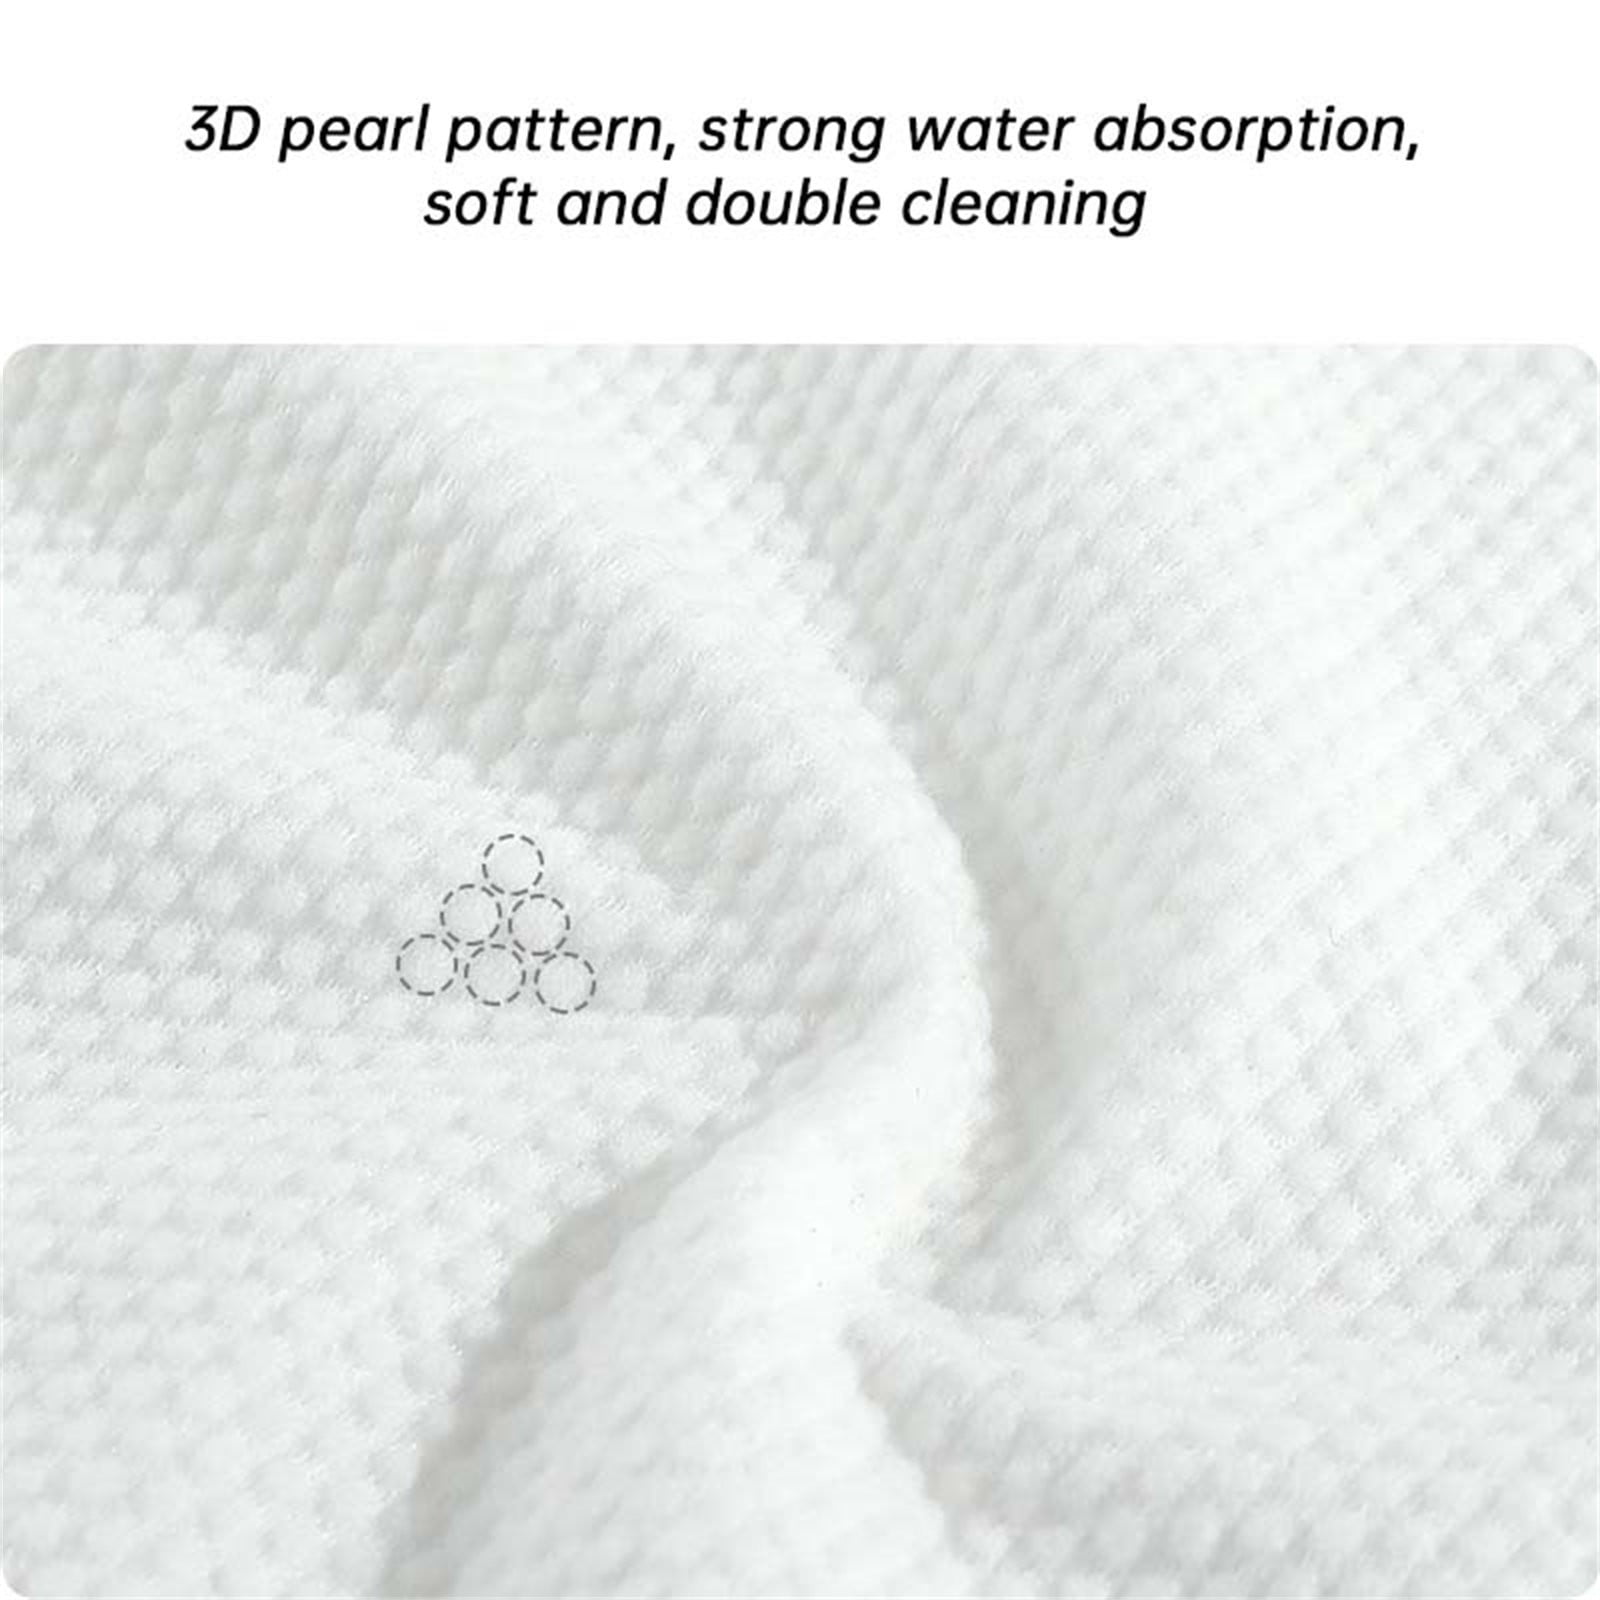 MELASOON Disposable Face Towel | 100% Biodegradable Natural Cotton Makeup Remover Dry Wipes | Facial Wash Cloth for Sensitive Skin (1 Pack | 60ct)